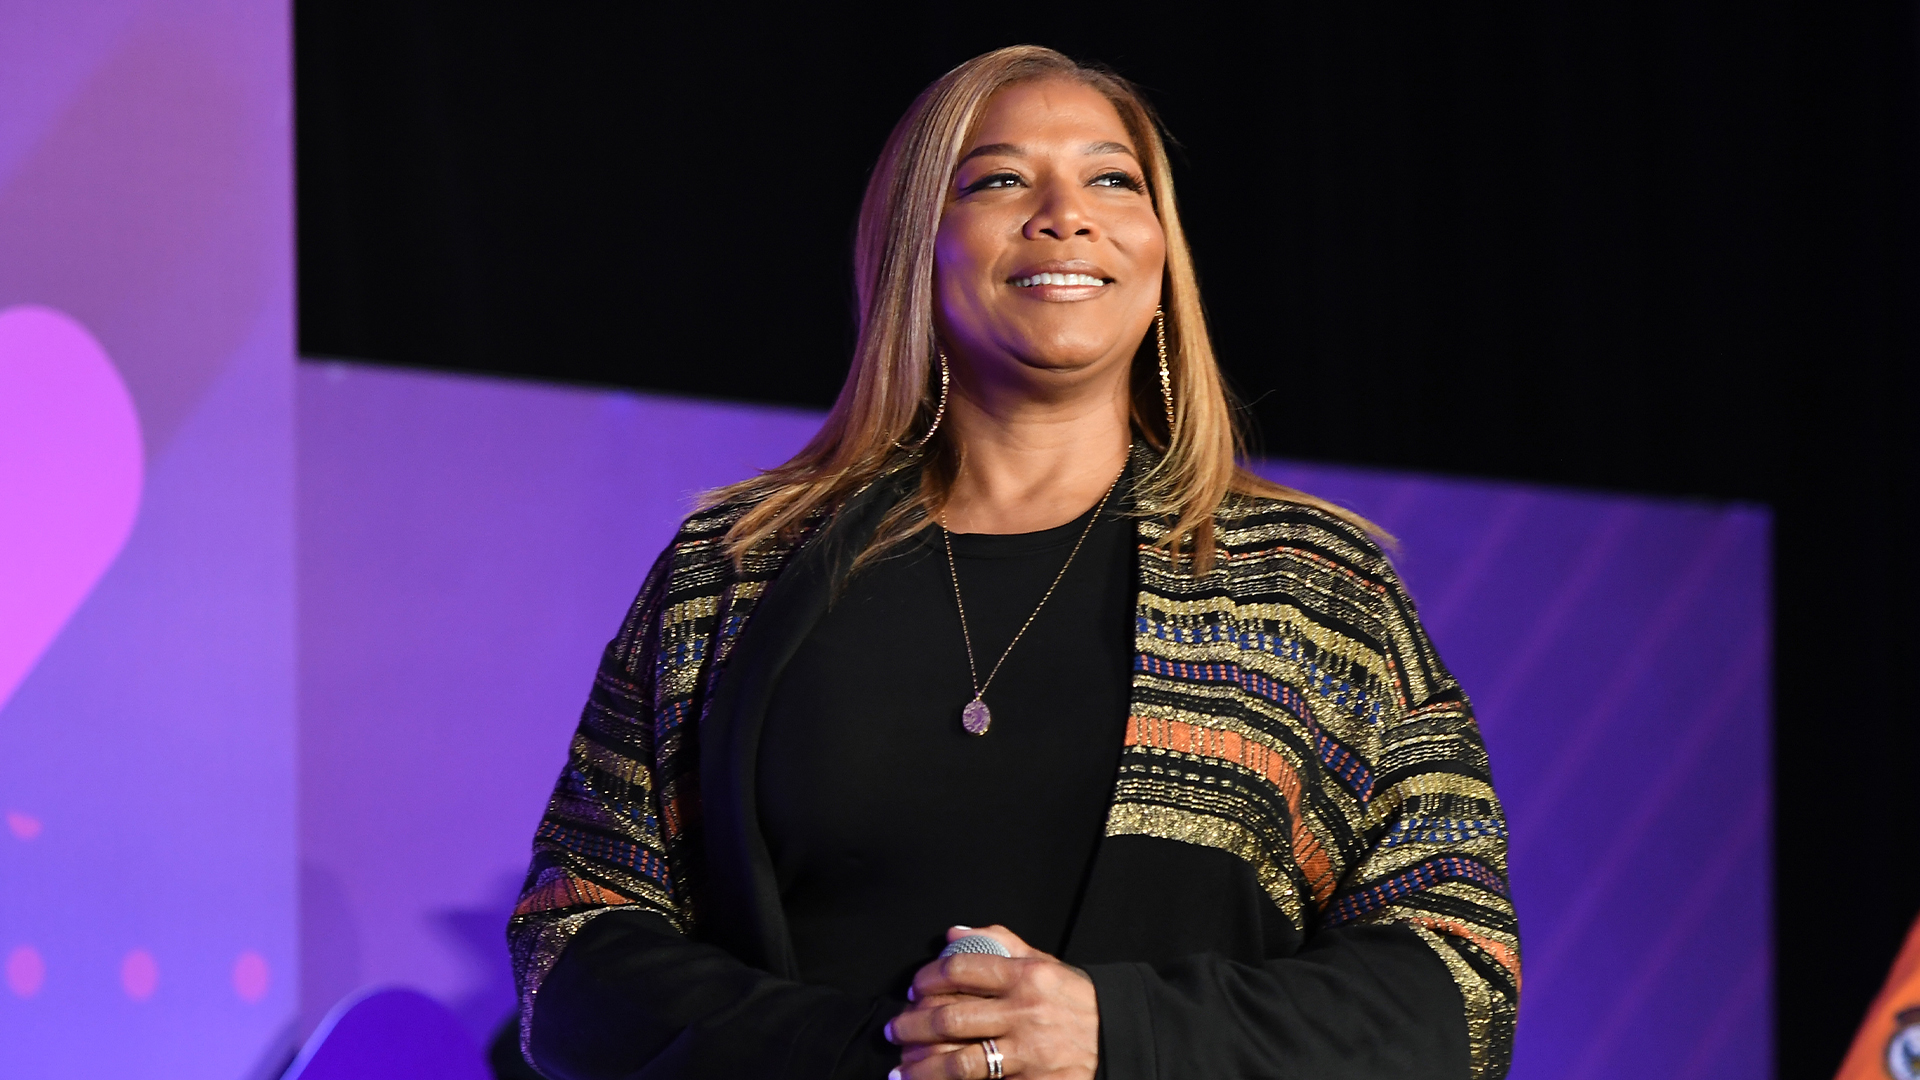 Queen Latifah Opens Up About Obesity For Campaign With Pharmaceutical Company Nova Nordisk